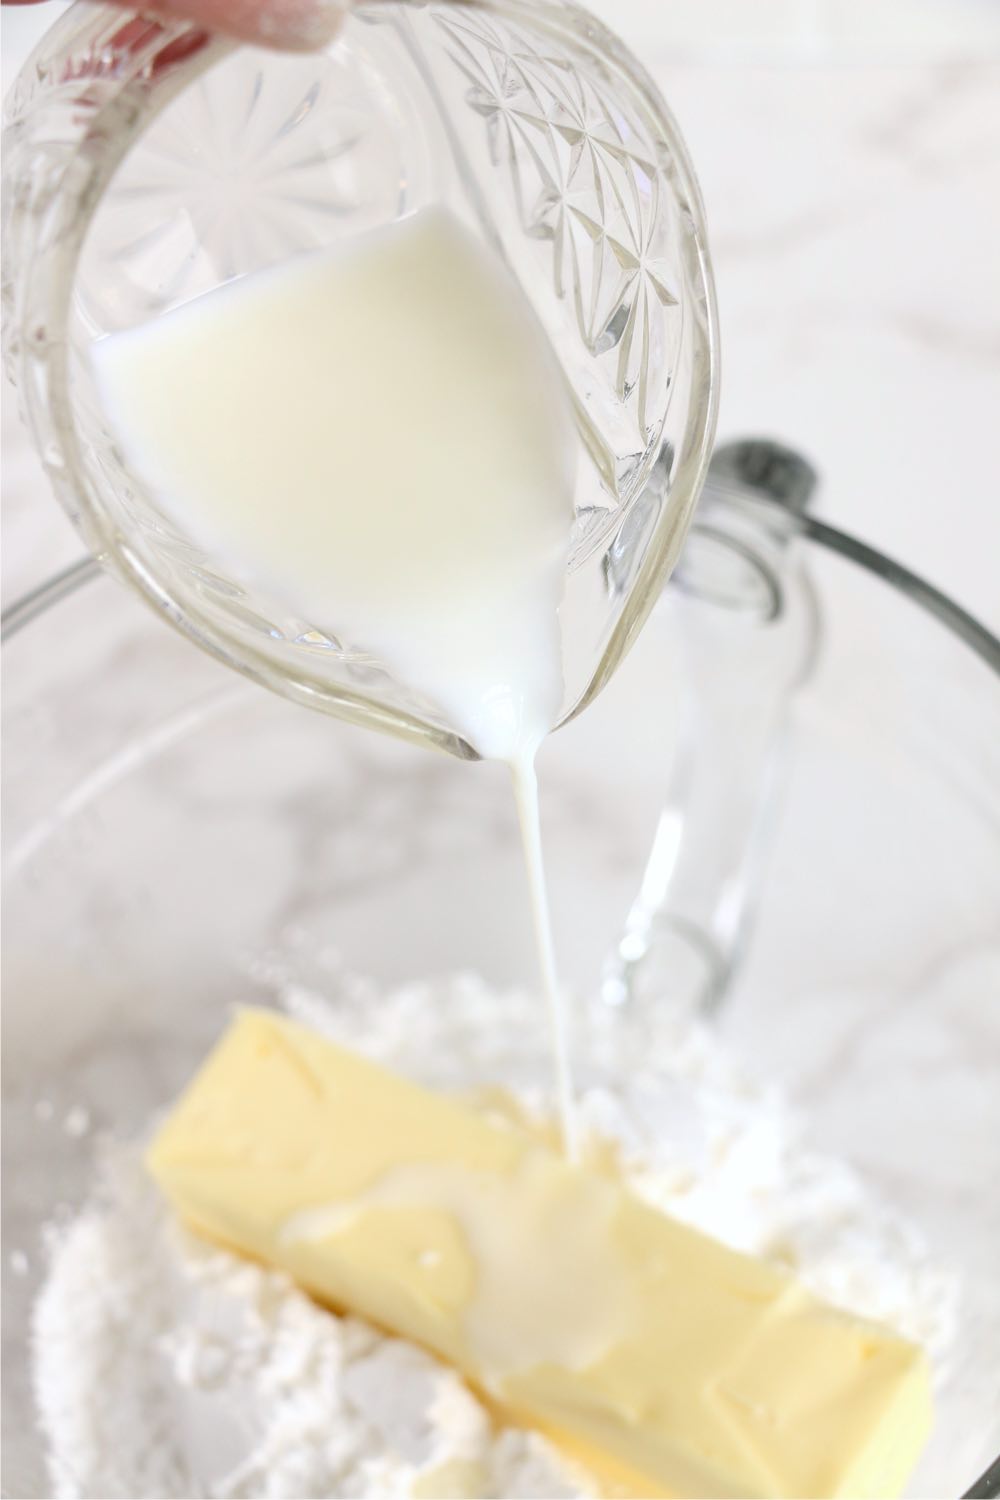 pouring milk into bowl of butter and milk